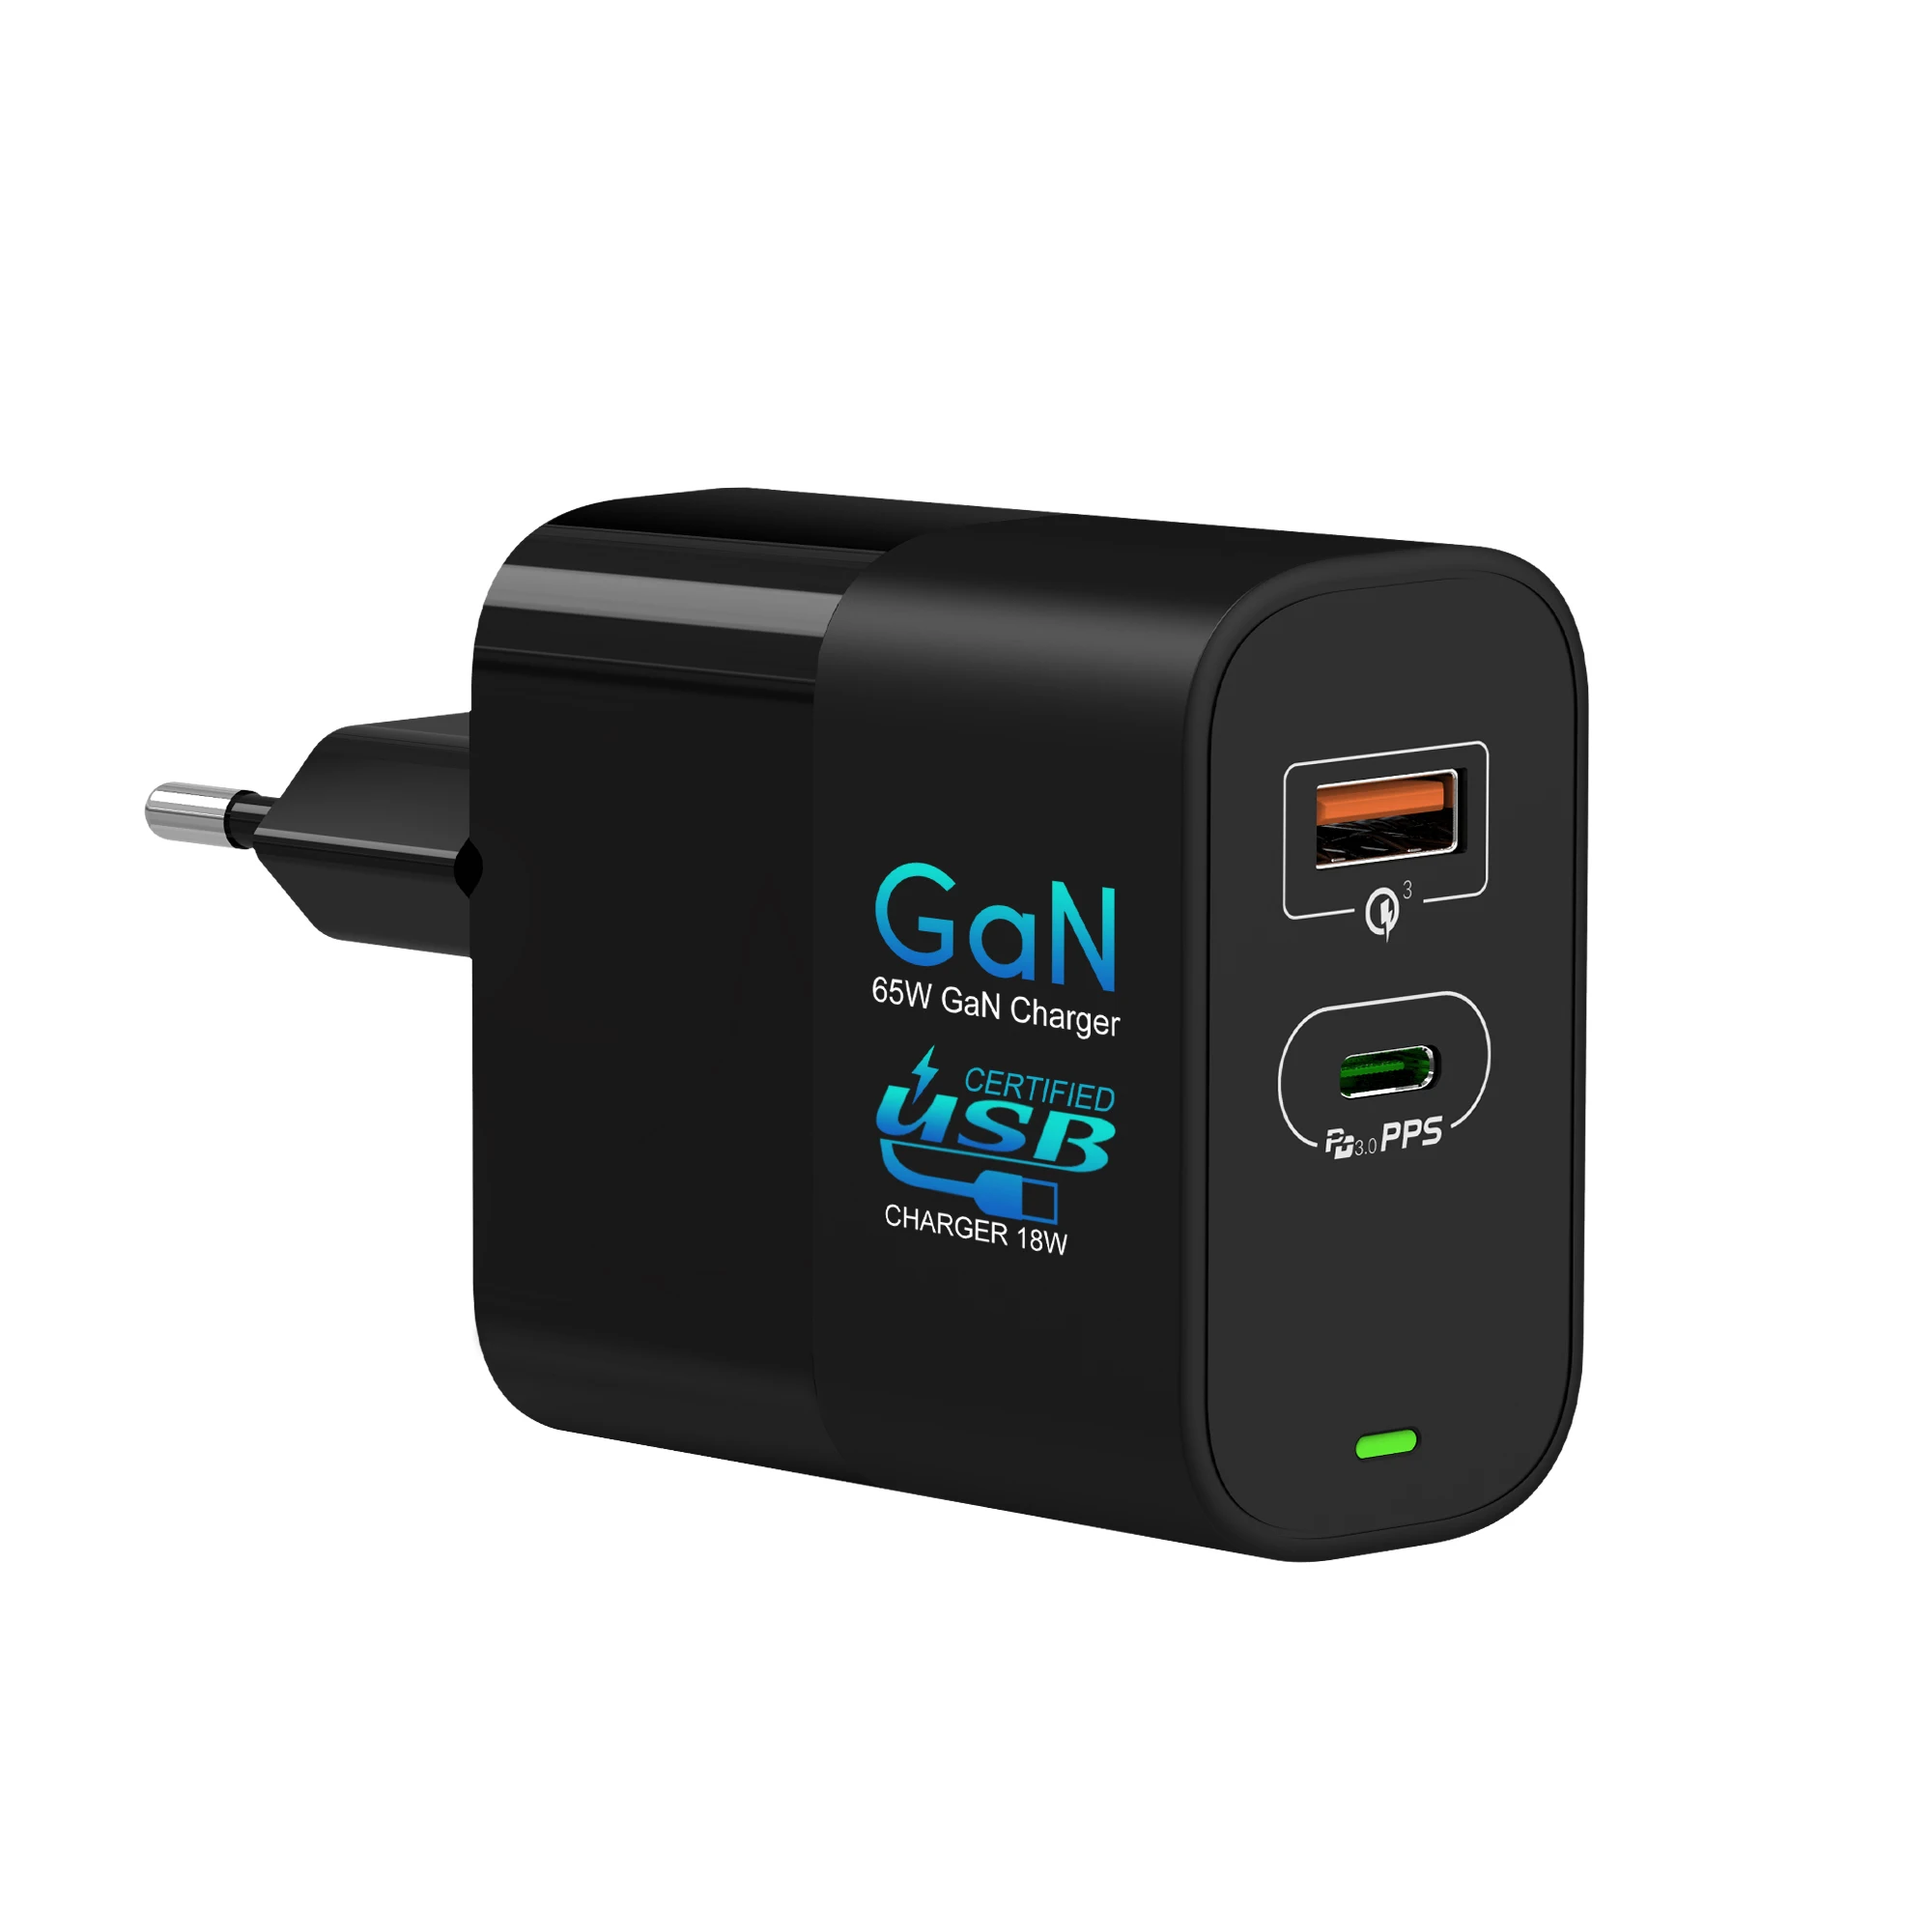 2020 New Technology Gallium dual ports PD Charger Type C 65W replaceable US/AU/UK plug Usb 3.0 charger for laptop Adapter